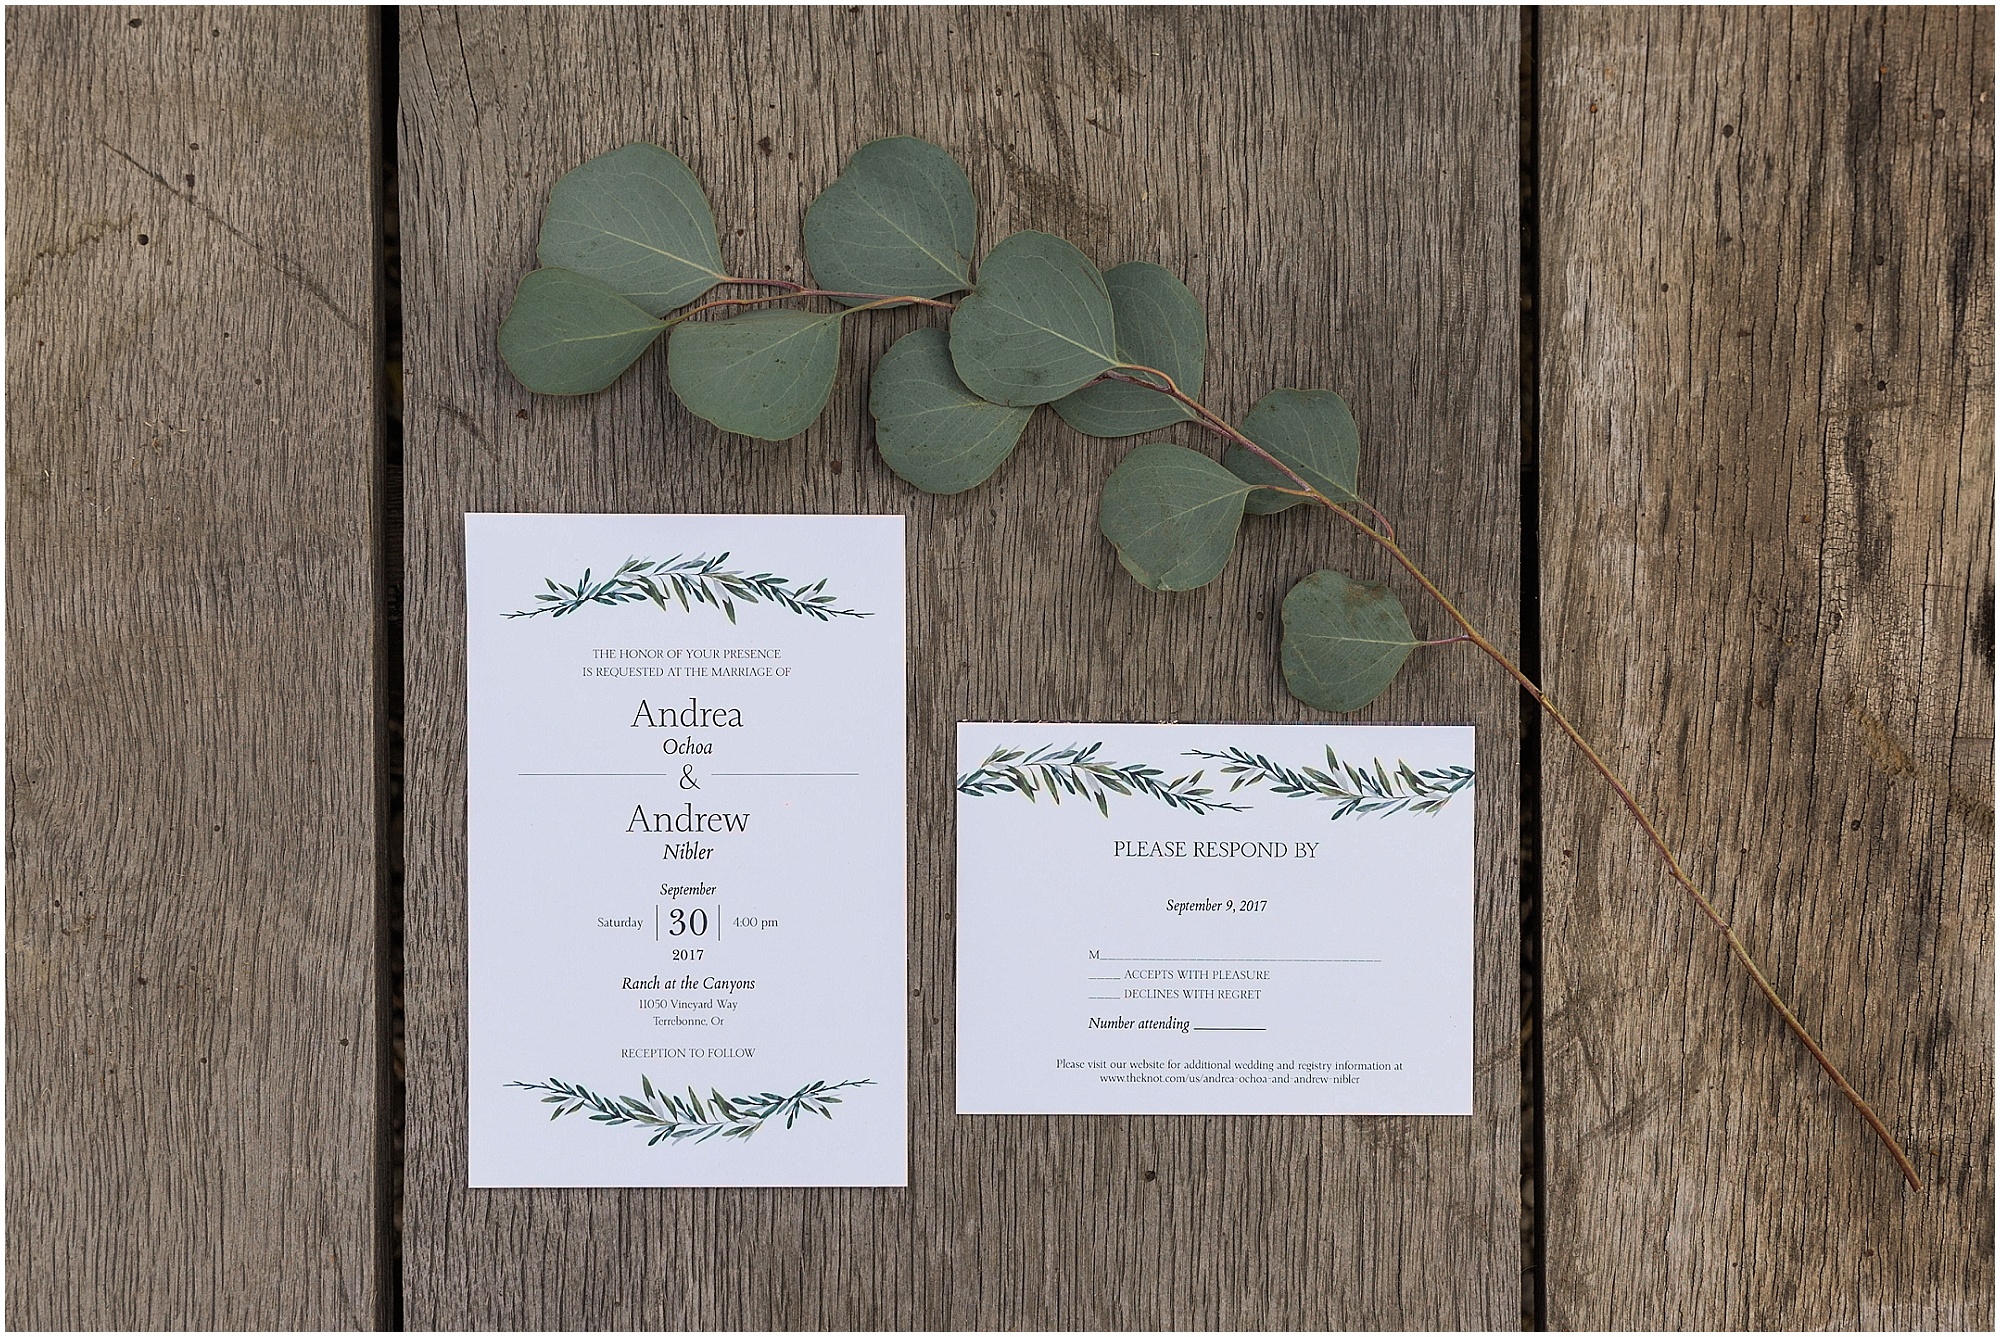 A simple wedding invitation suite for a Ranch at the Canyons fall wedding in Bend, OR. | Erica Swantek Photography